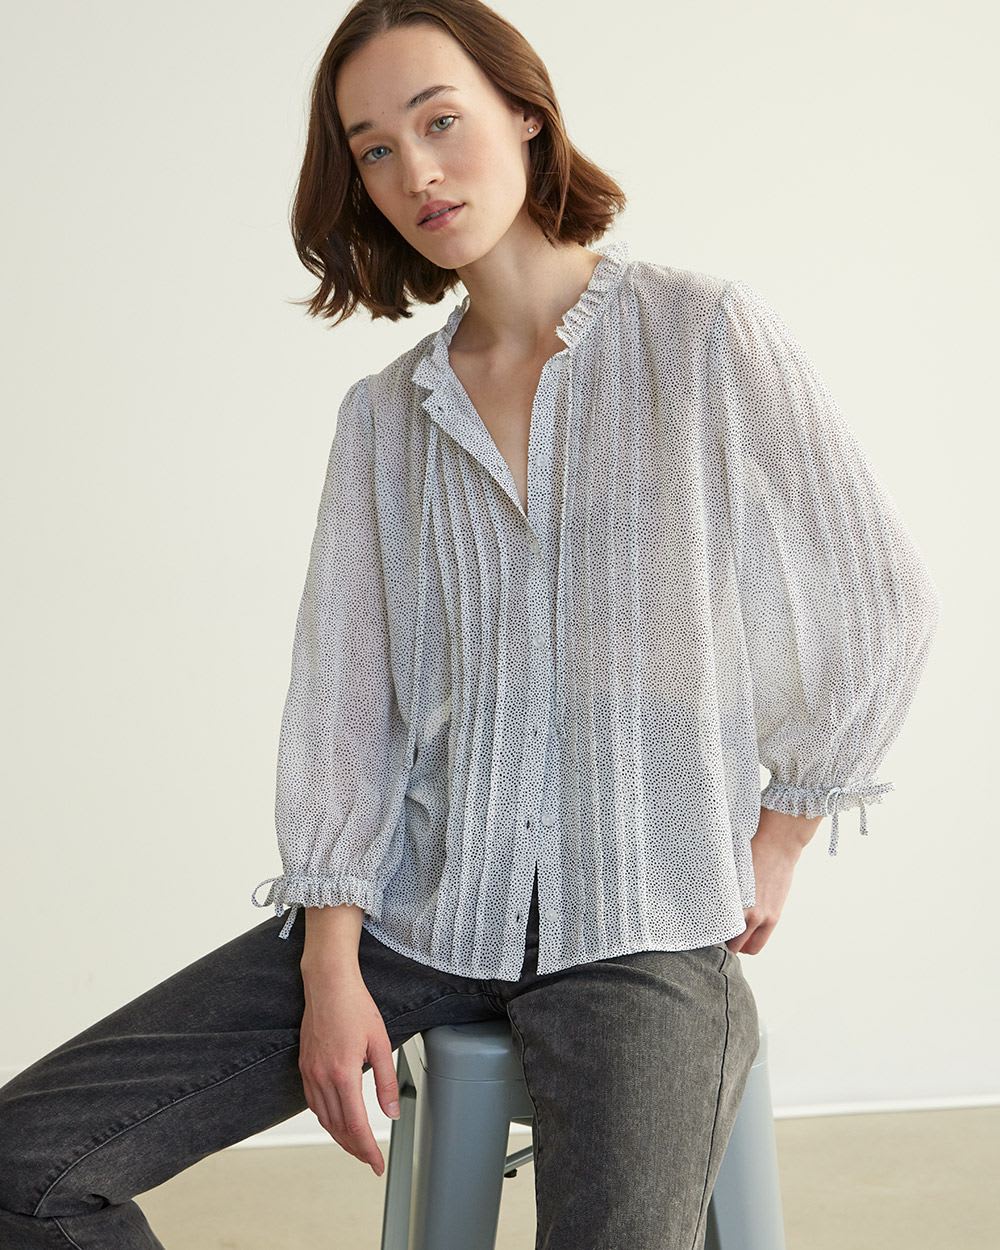 3/4 Sleeve Blouse with Ruffled Neckline